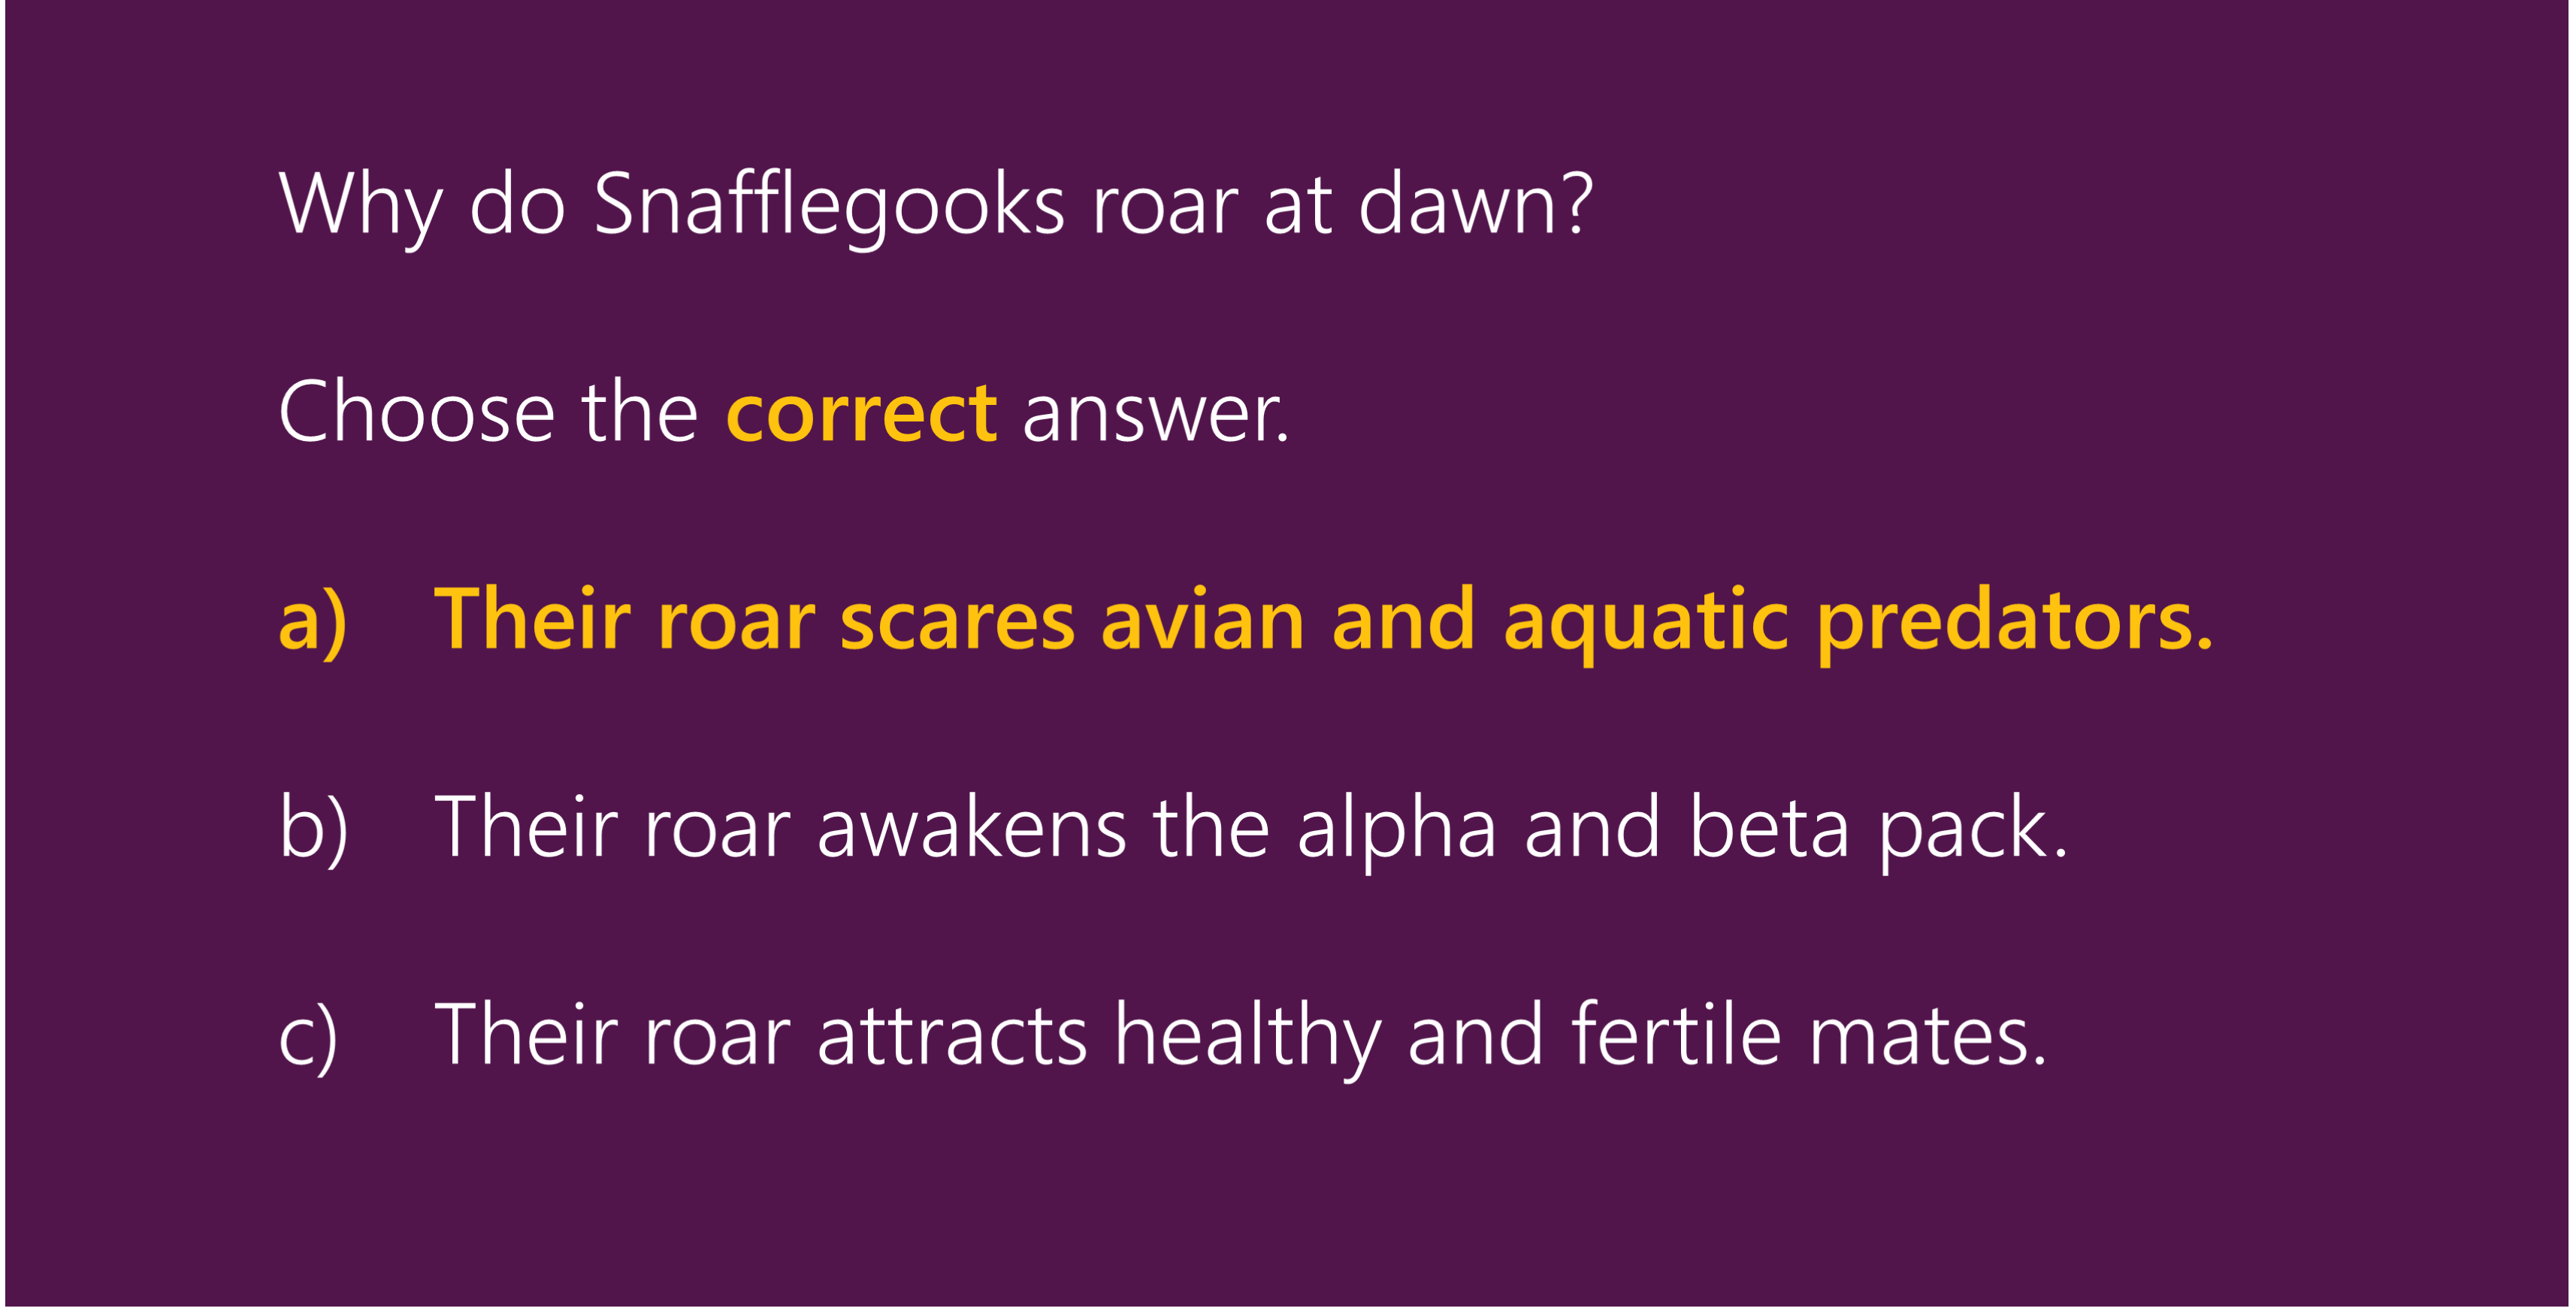 Why do Snafflegooks roar at dawn? Choose the correct answer. A) Their roar scares avian and aquatic predators. B) Their roar awakens the alpha and beta pack. C) Their roar attracts healthy and fertile mates.